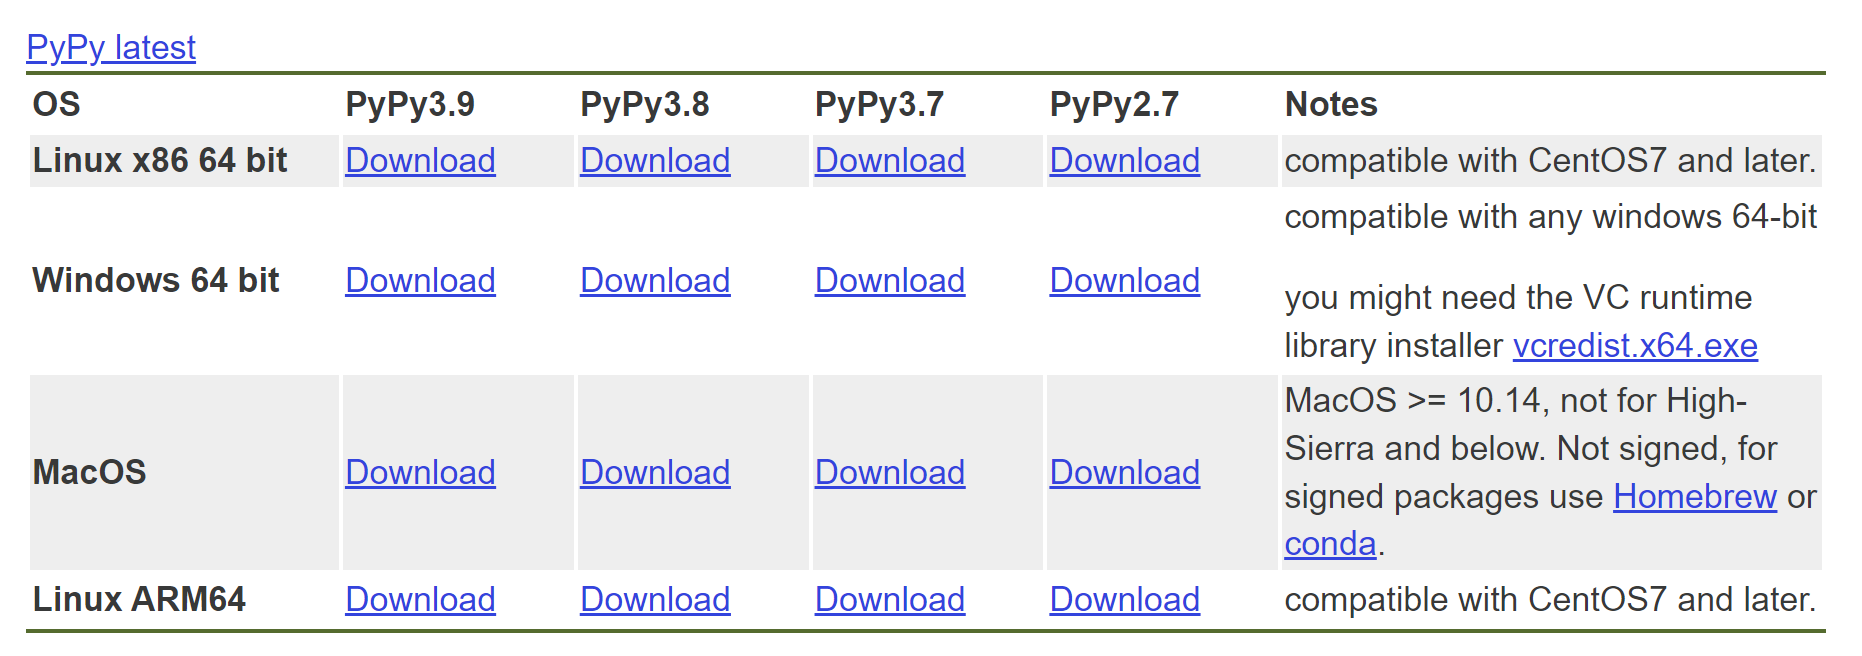 pypy_01.png